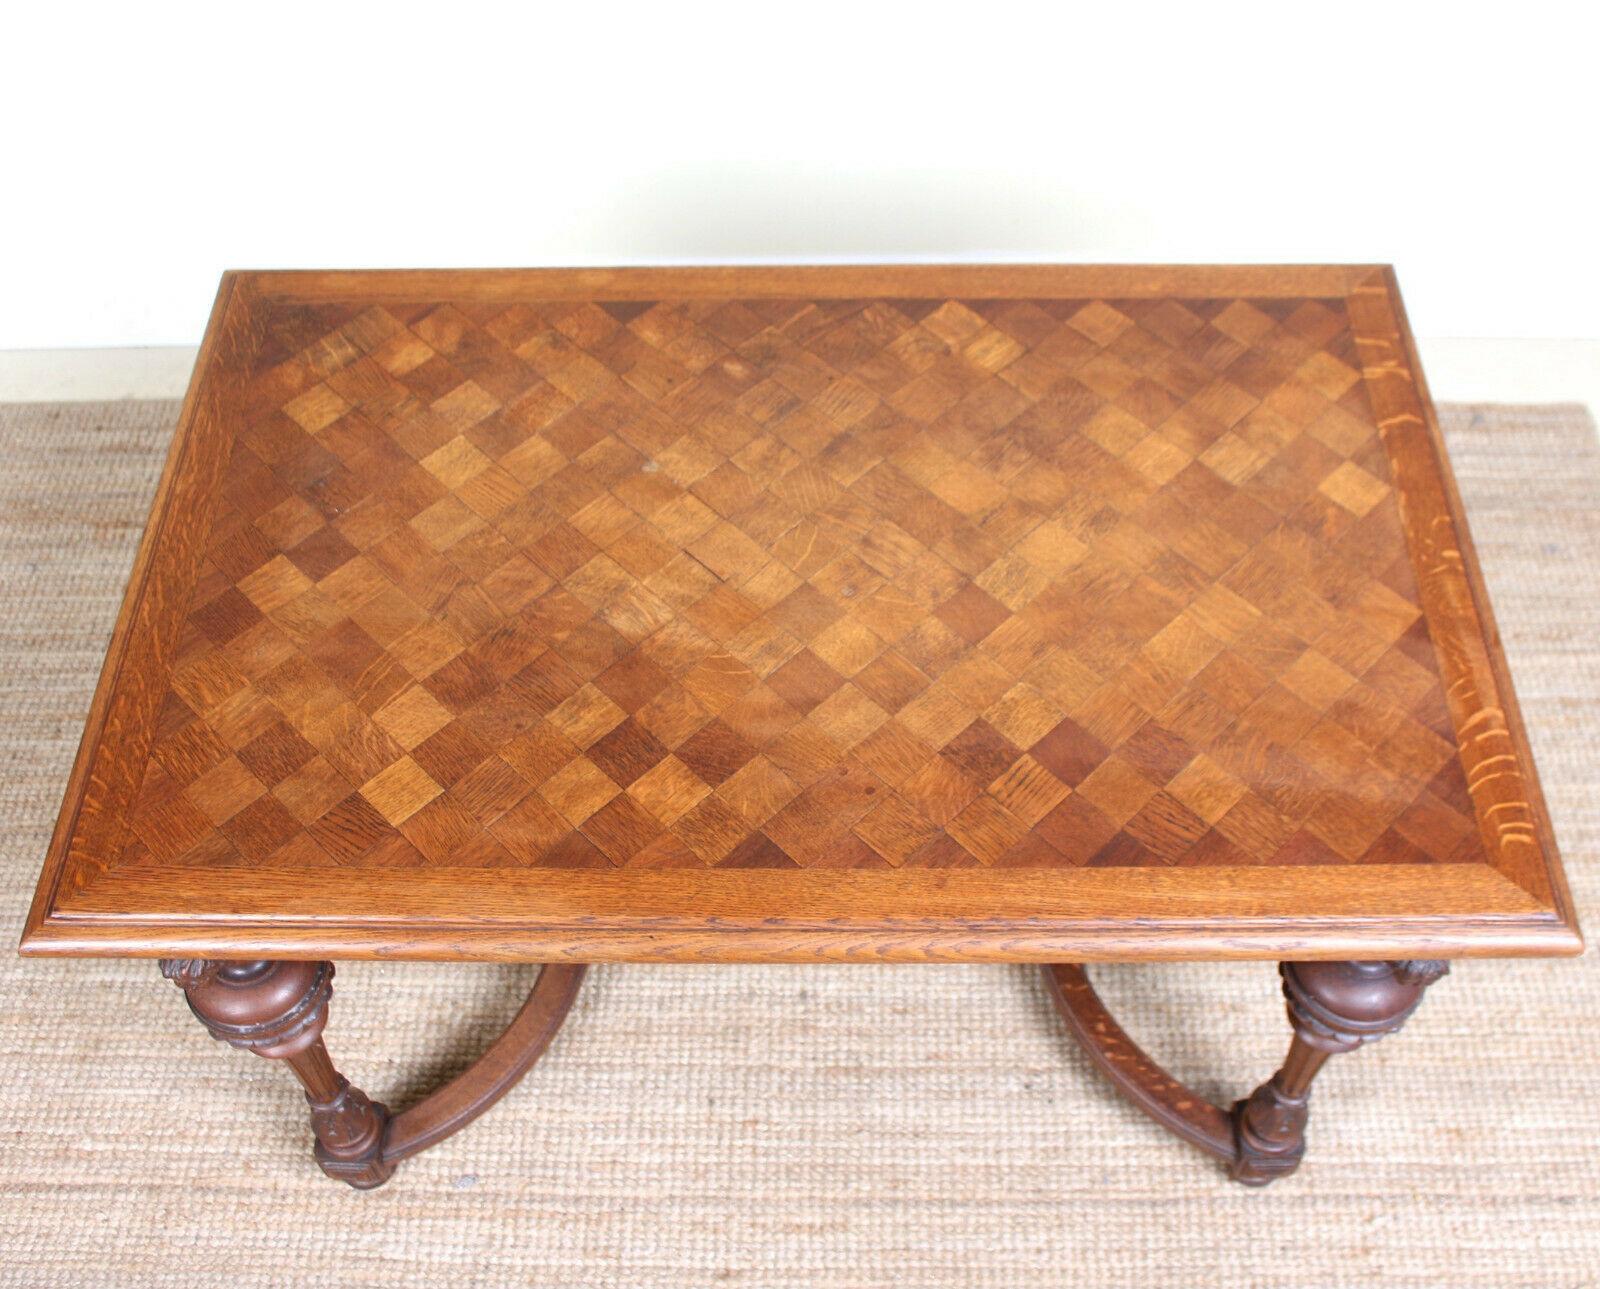 An impressive 19th century Swedish carved oak parquetry table.
Constructed from thick cuts of solid oak boasting a well figured grain.
The top boasting parquetry inalys, carved chamfered edges and raised on finely worked turned and fluted legs